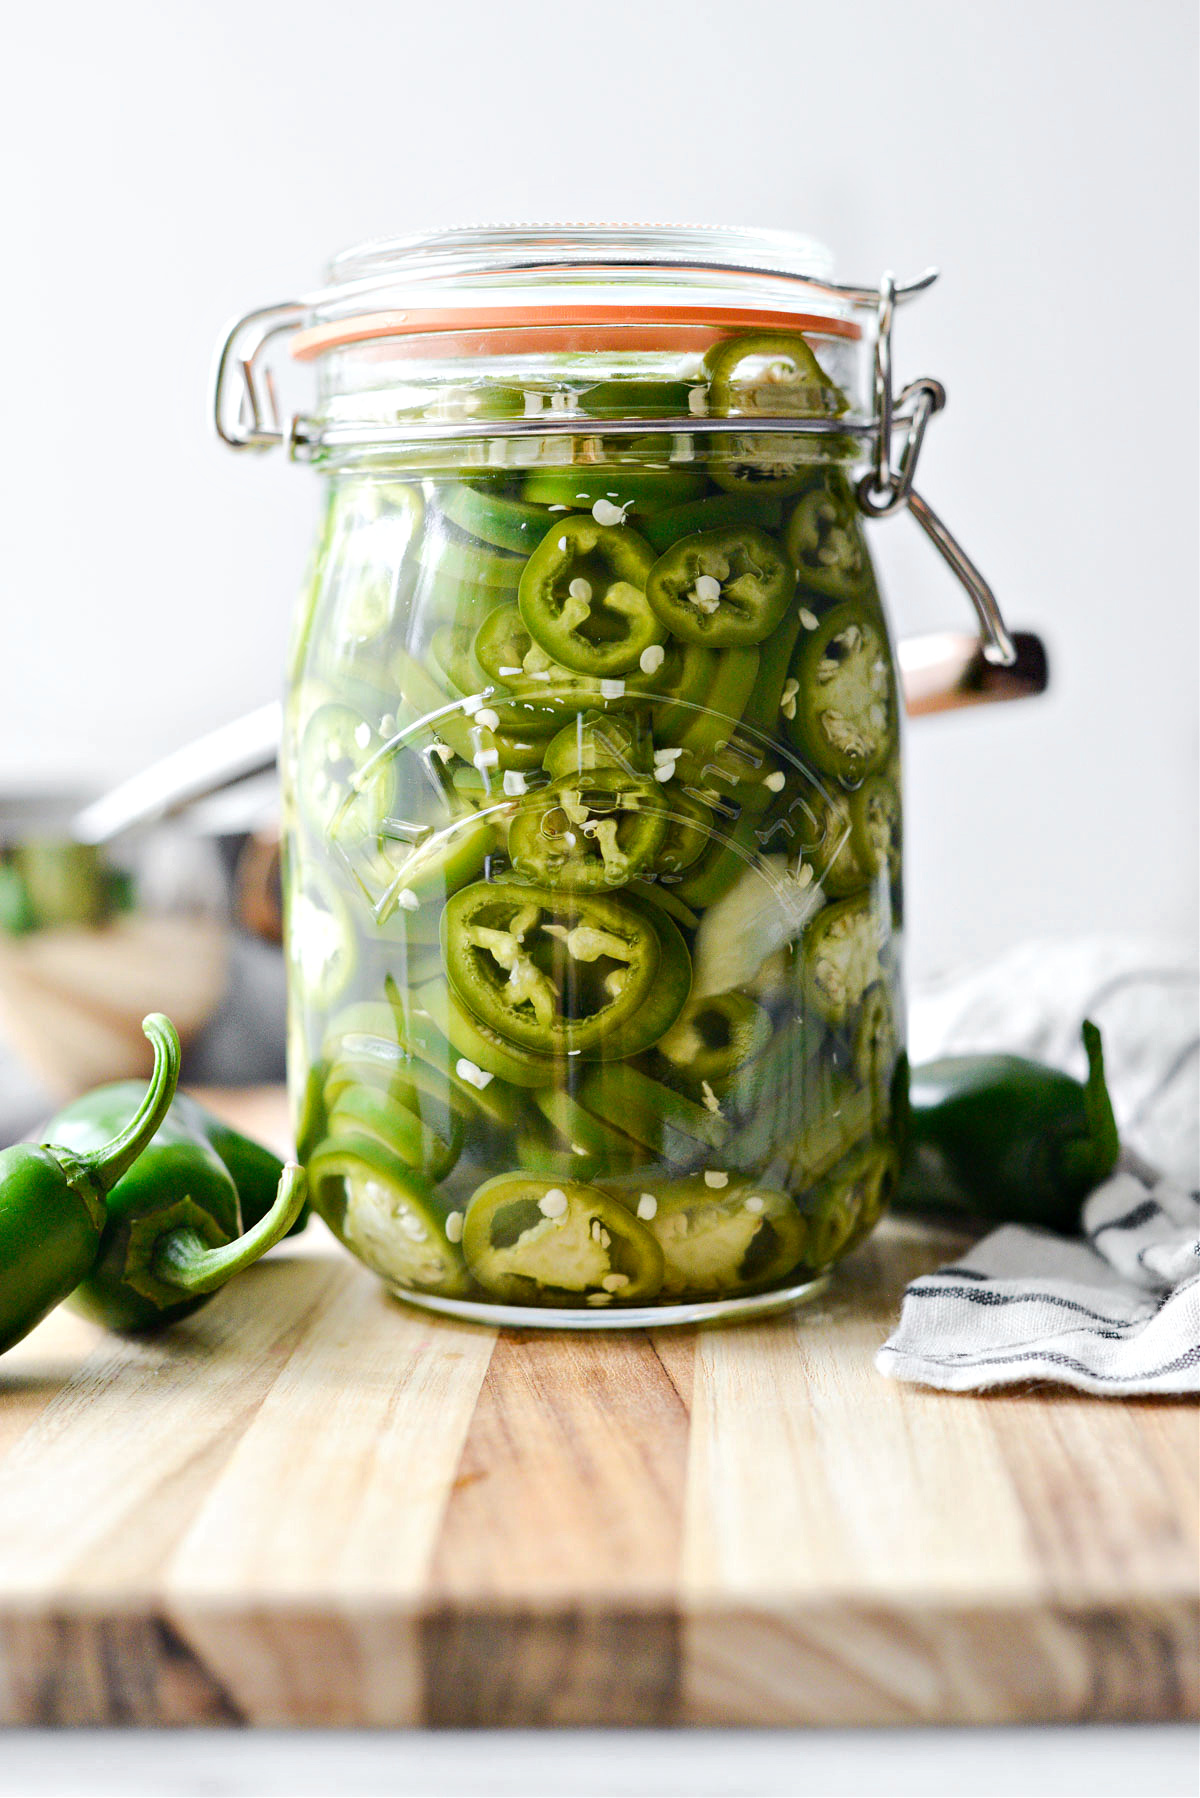 Would you try this? I'm not a fan of pickles or anything spicy but I k